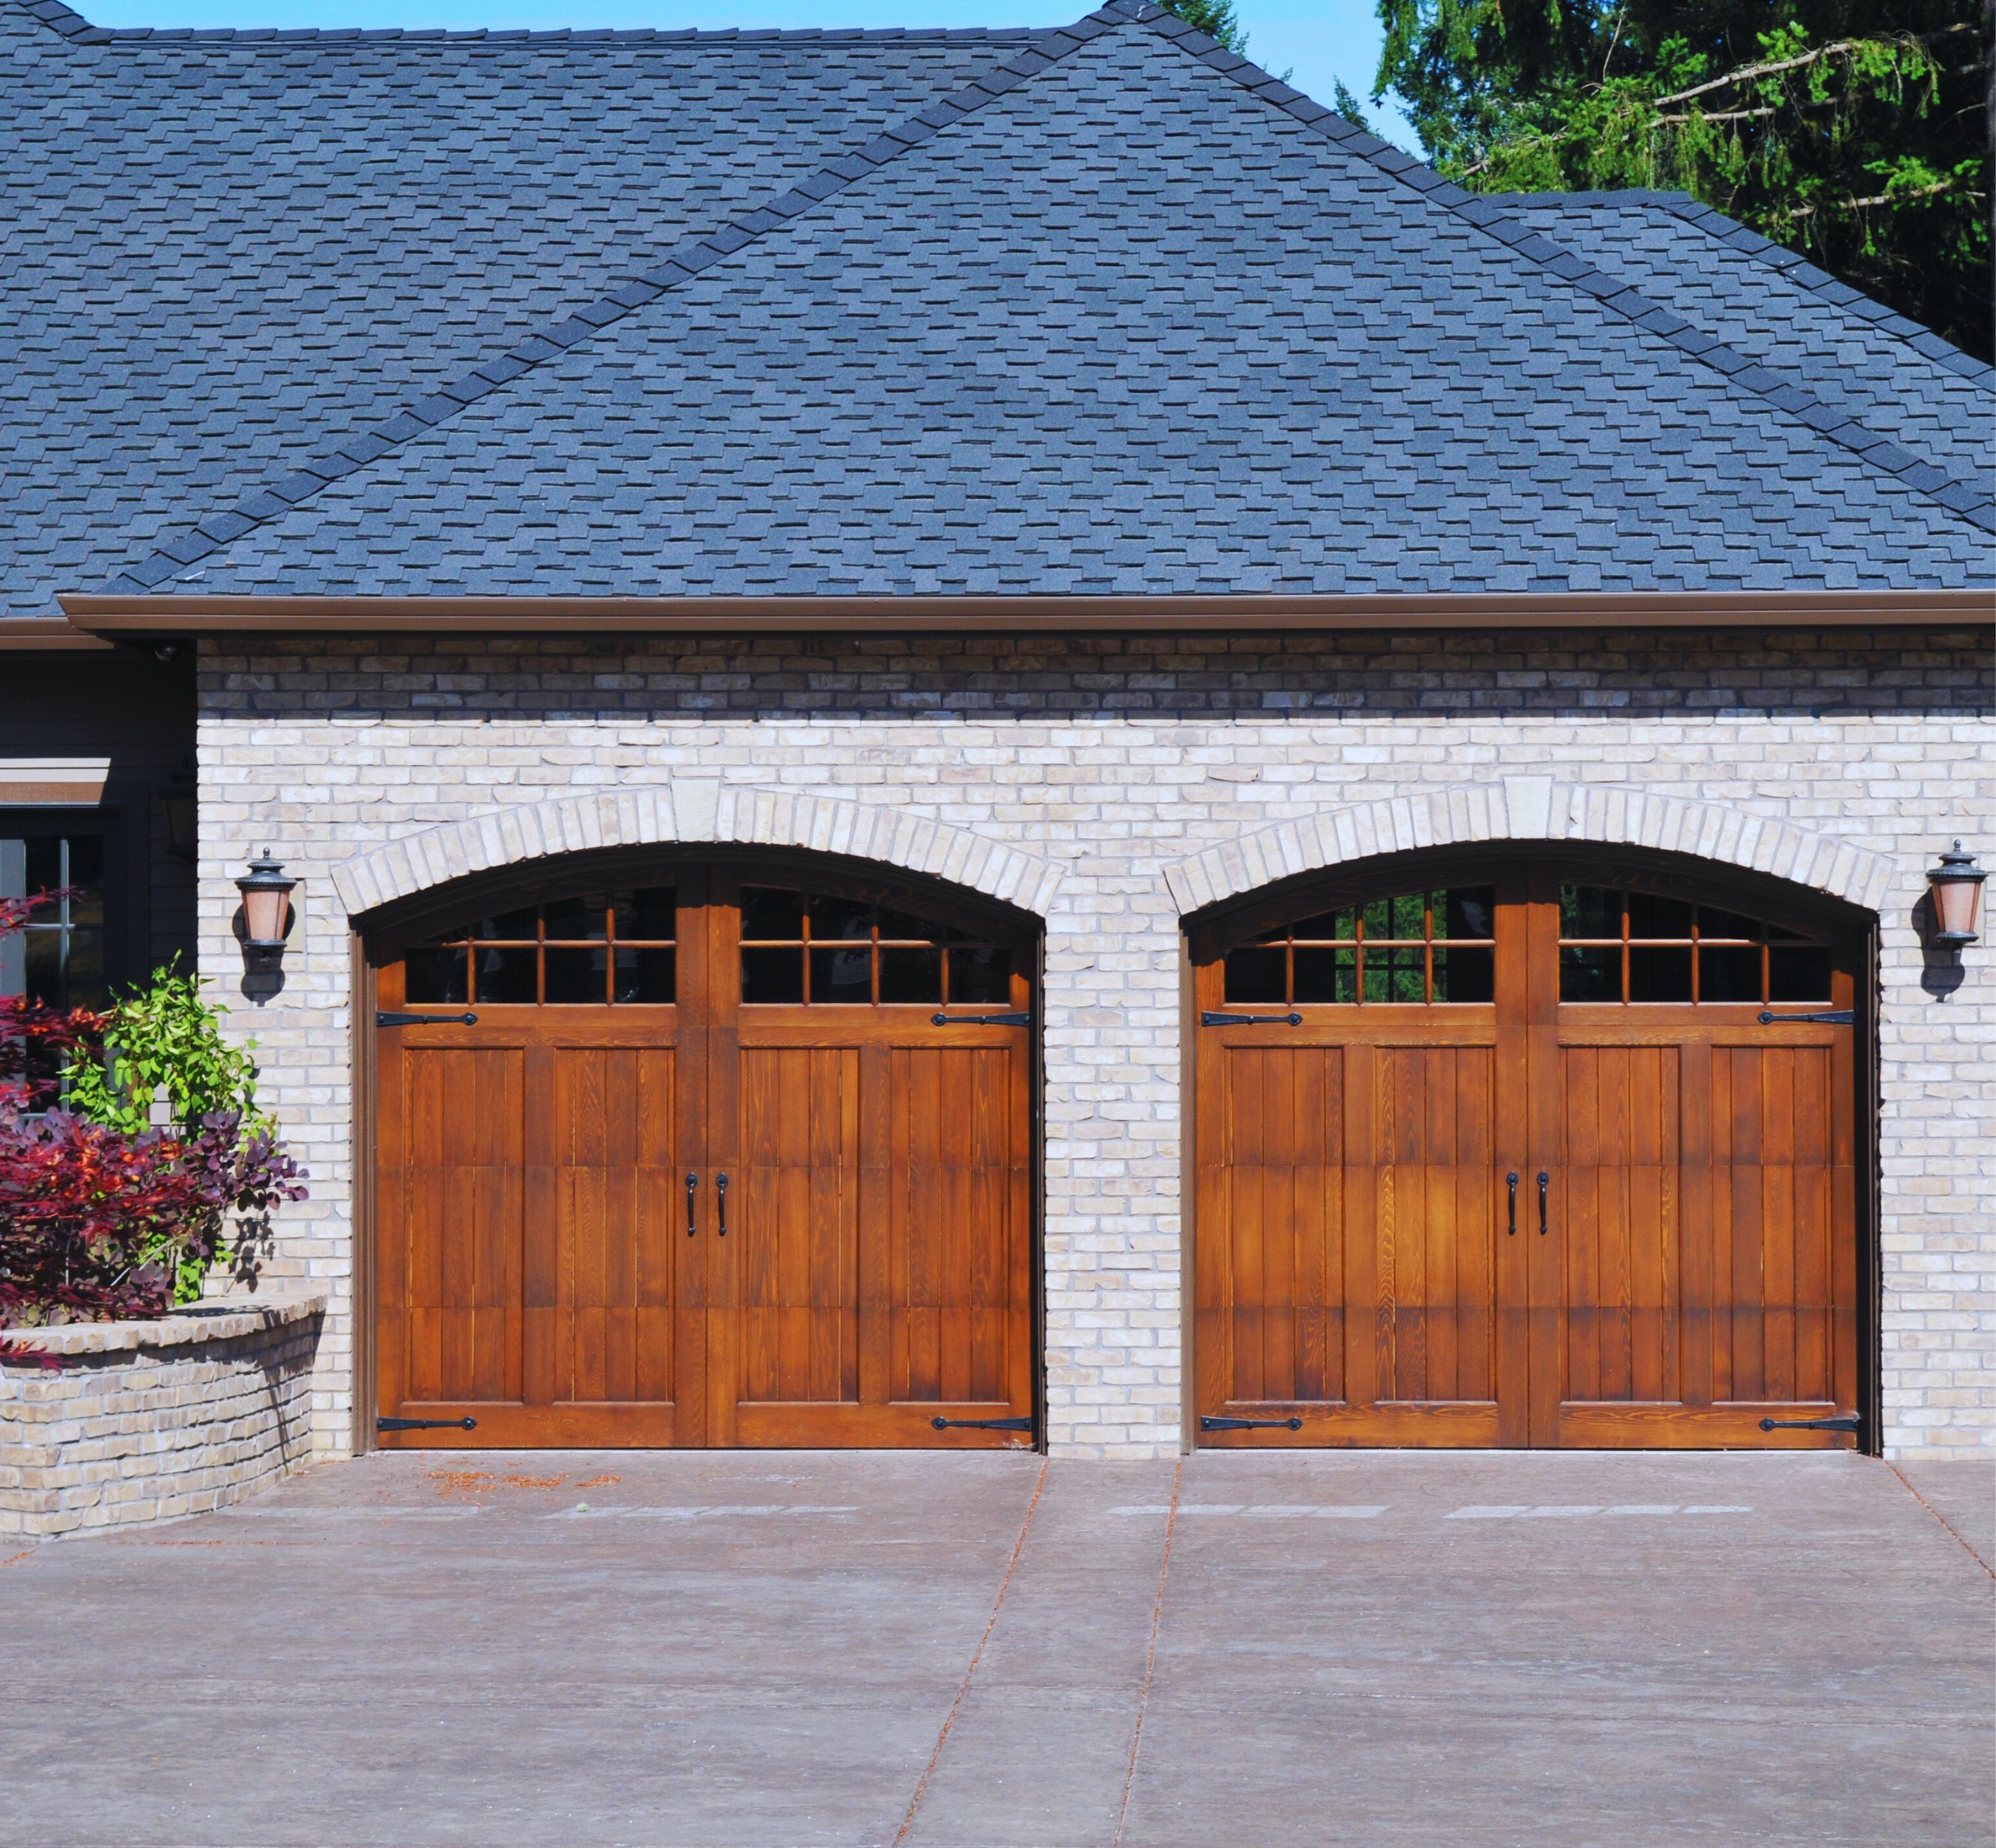 A wooden garage door of a residential property with space for two cars, showcasing the aesthetic appeal and functionality of Garage Door In My Area's installations.